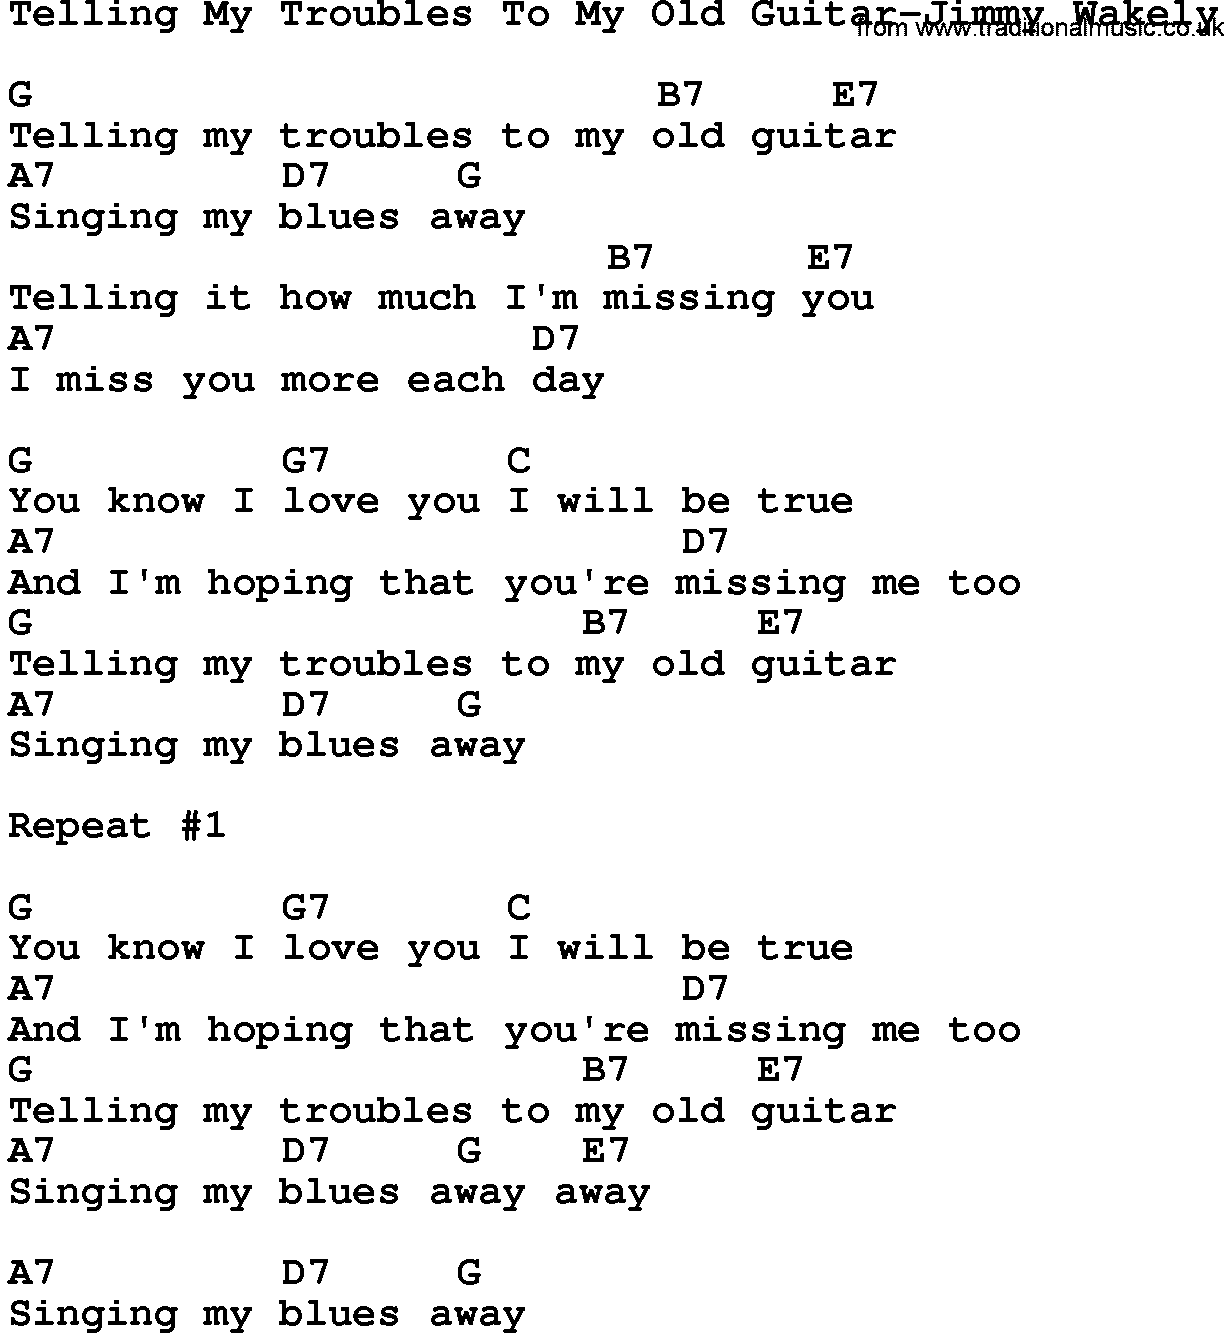 Country music song: Telling My Troubles To My Old Guitar-Jimmy Wakely lyrics and chords